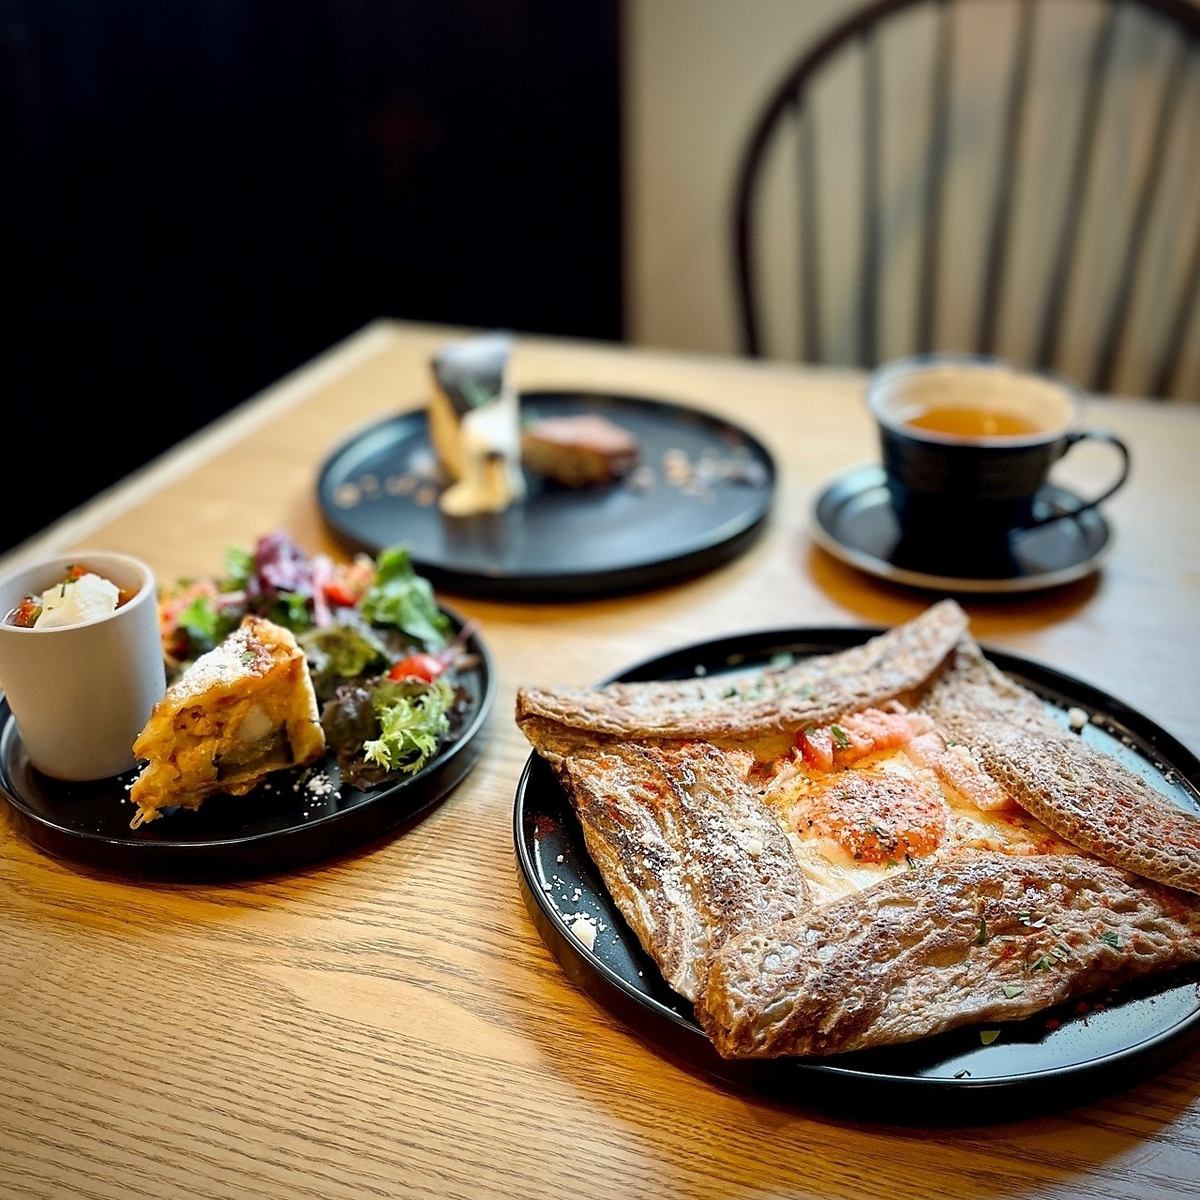 A hideaway cafe with delicious "100% buckwheat galette" and "dessert"